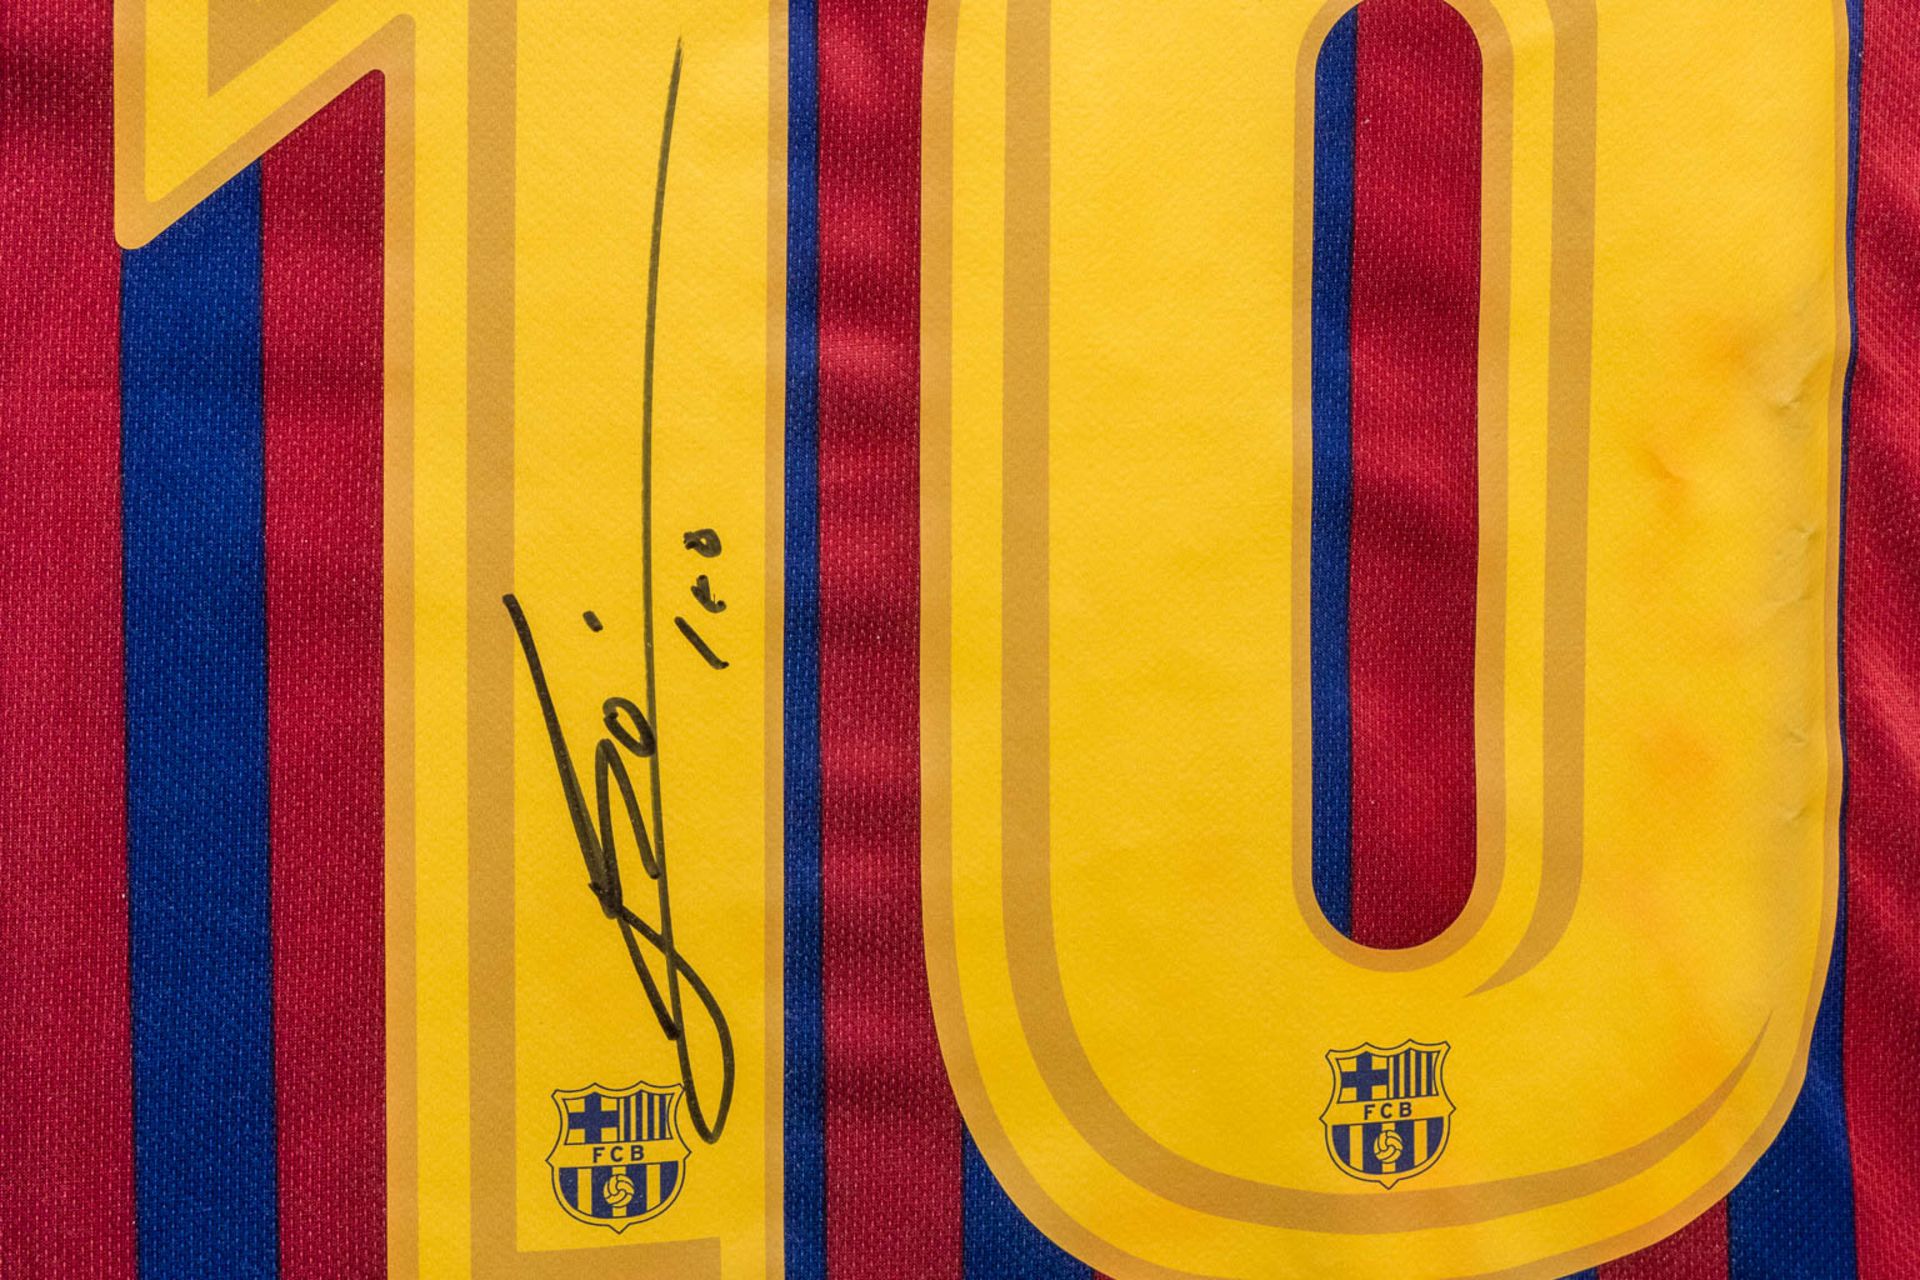 A soccer jersey of FC Barcelona with No 10 and signed by Lionel MESSI, framed. (77 x 75 cm) - Image 3 of 8